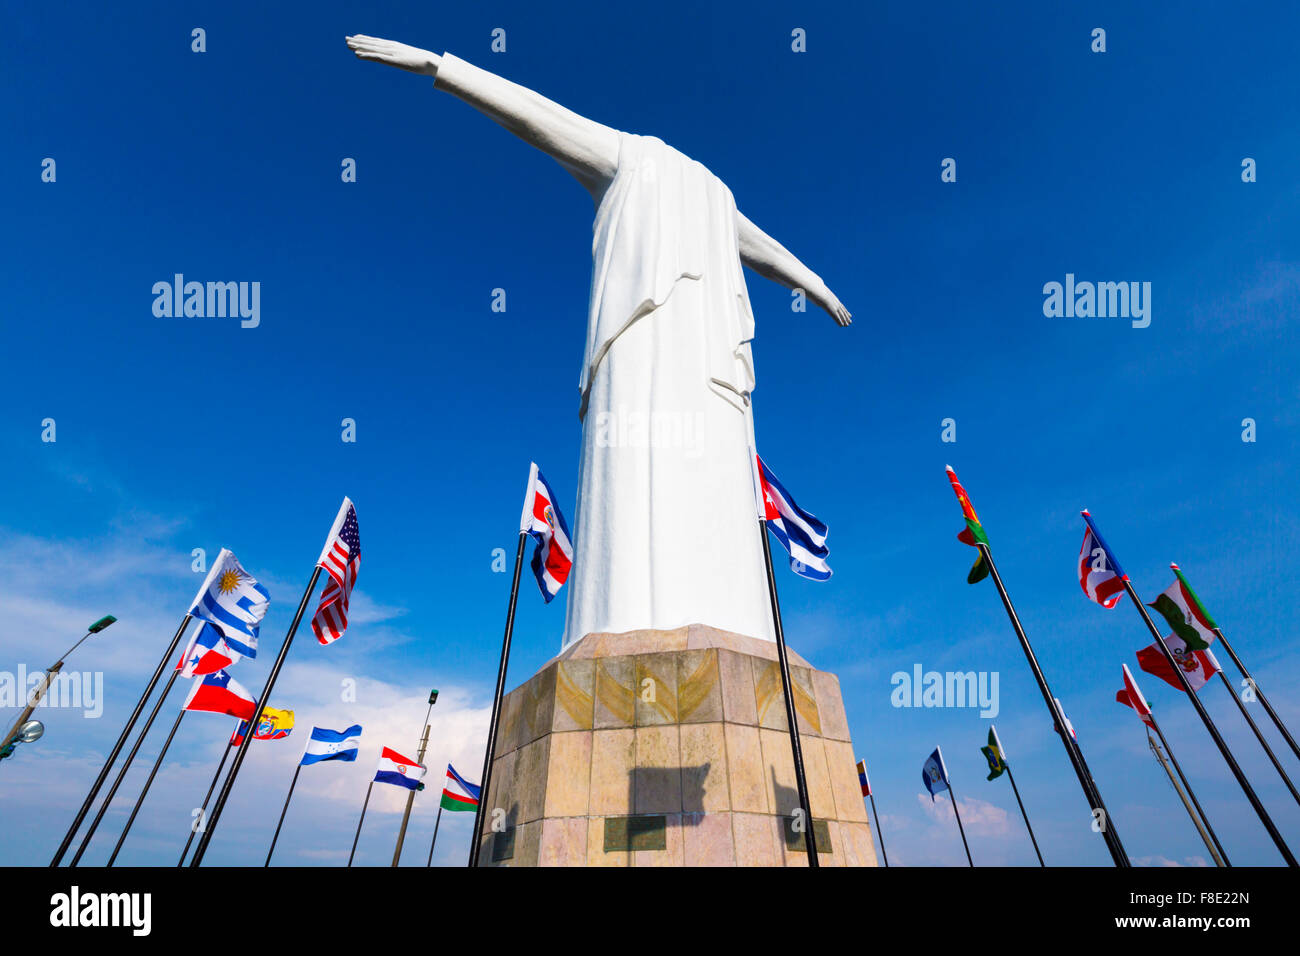 Cristo del Rey statue of Cali against a blue sky with international flags waving around. Colombia Stock Photo